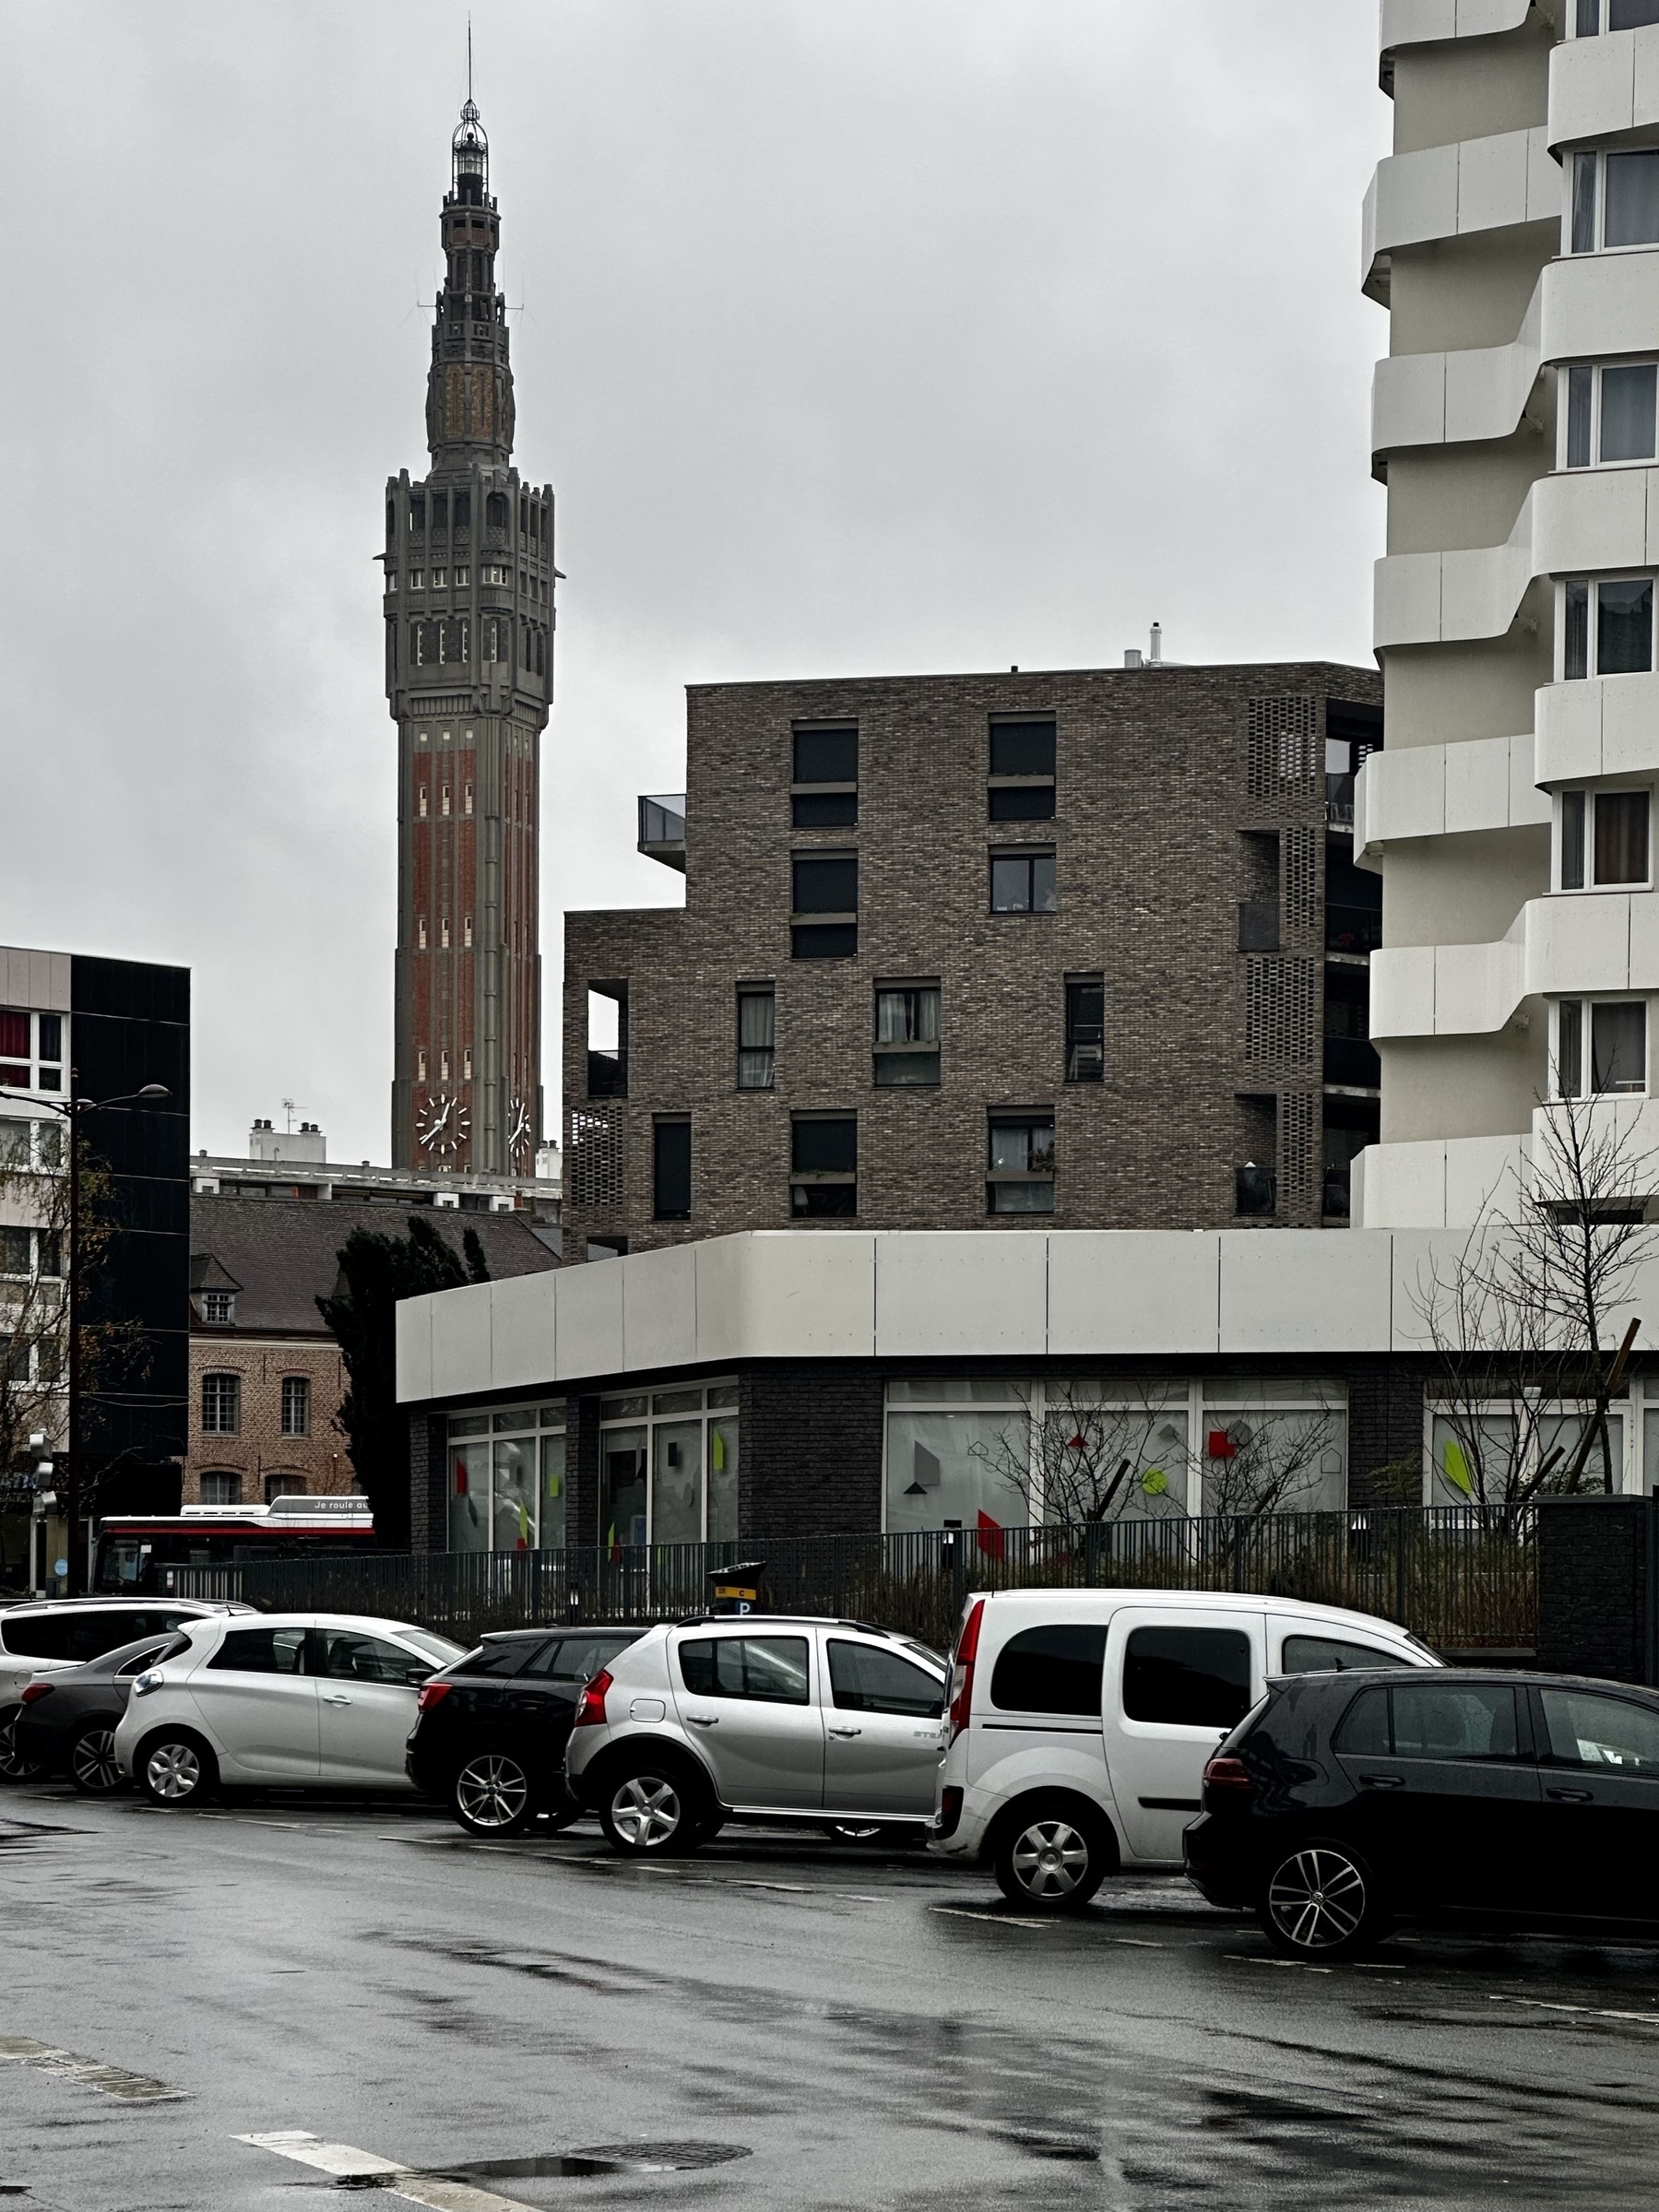 Belfry in the rainy distance, framed by brutalist buildings